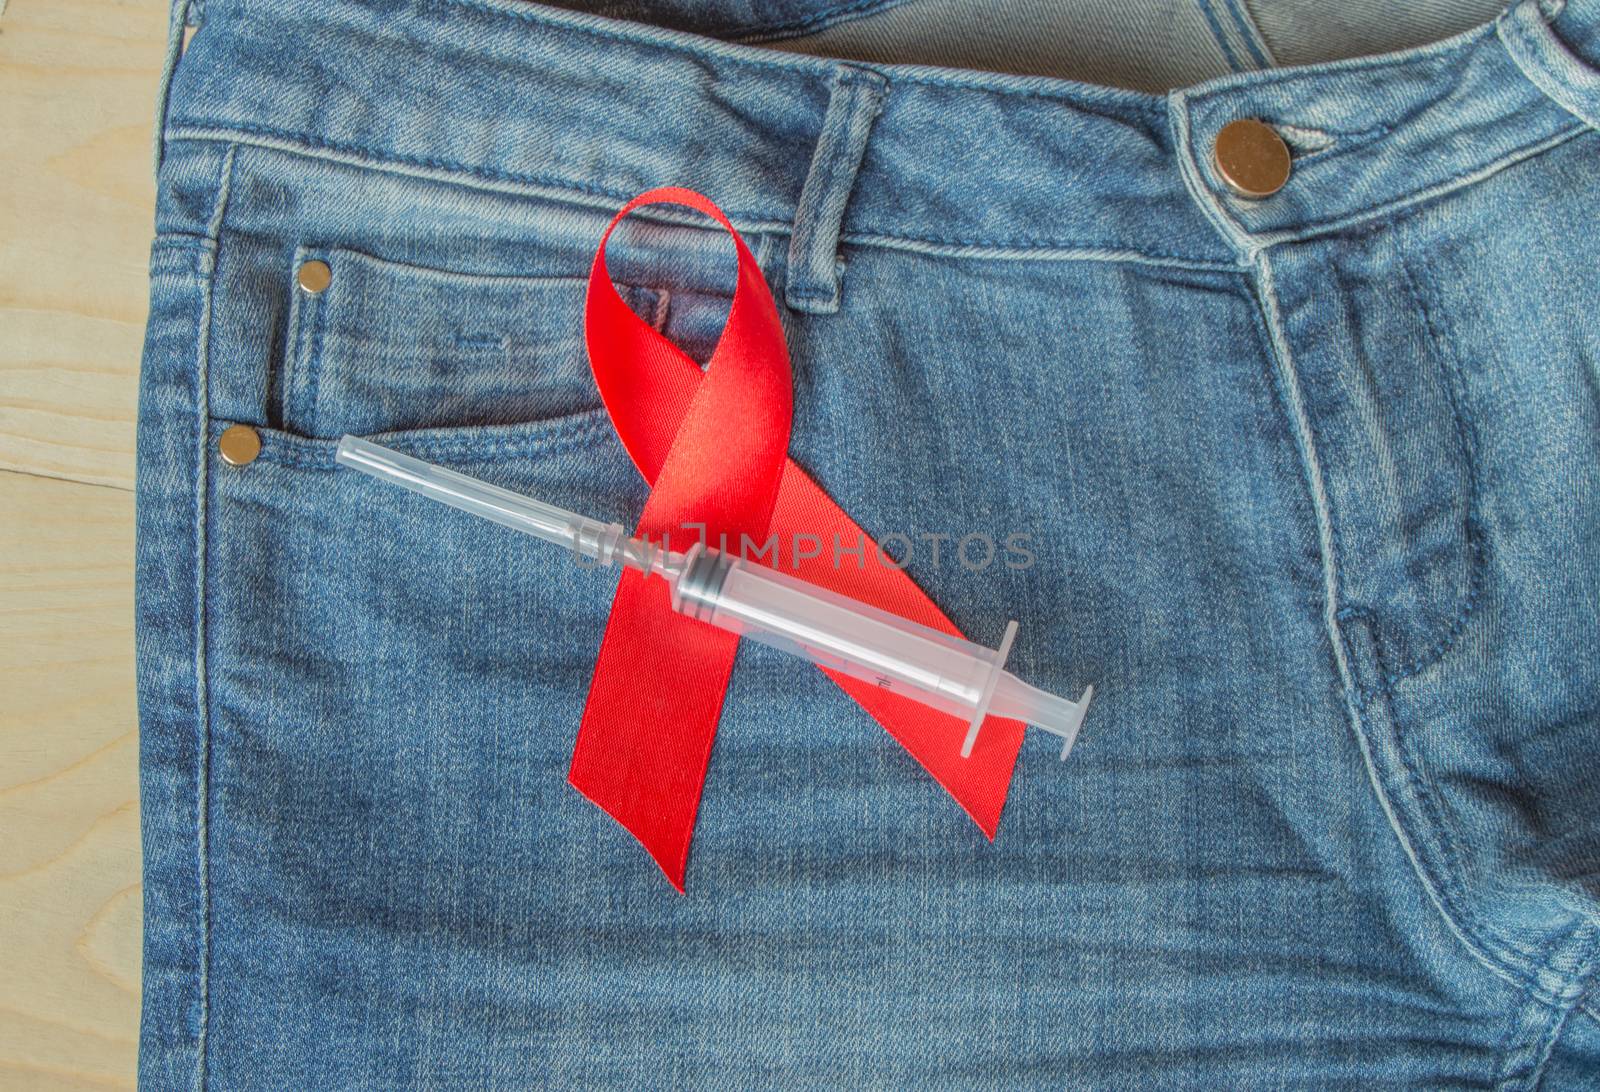 awareness AIDS red ribbon on jeans, a symbol of opposition